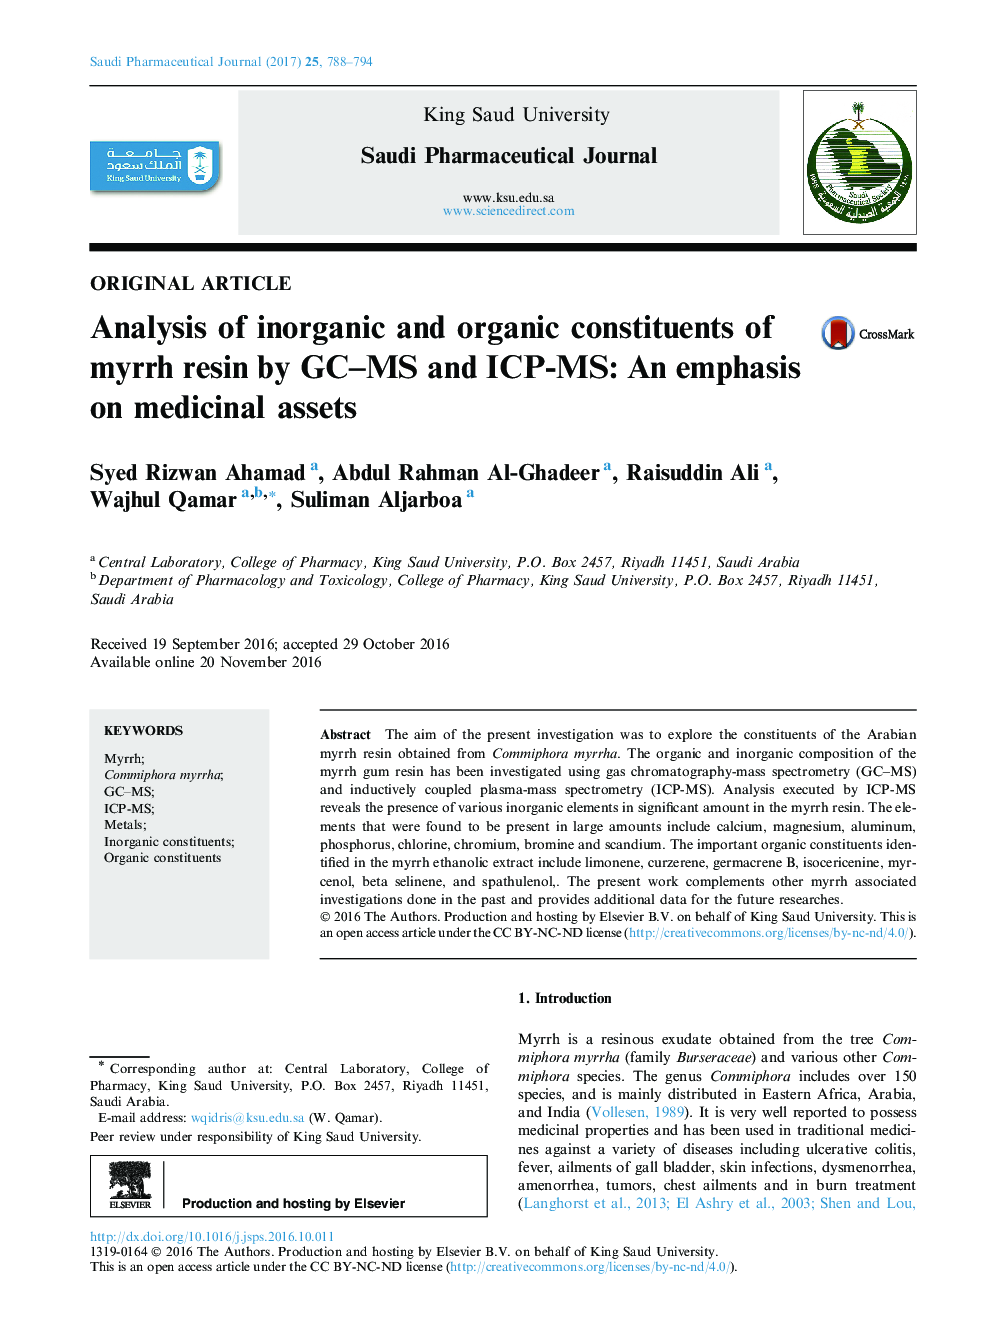 Analysis of inorganic and organic constituents of myrrh resin by GC-MS and ICP-MS: An emphasis on medicinal assets